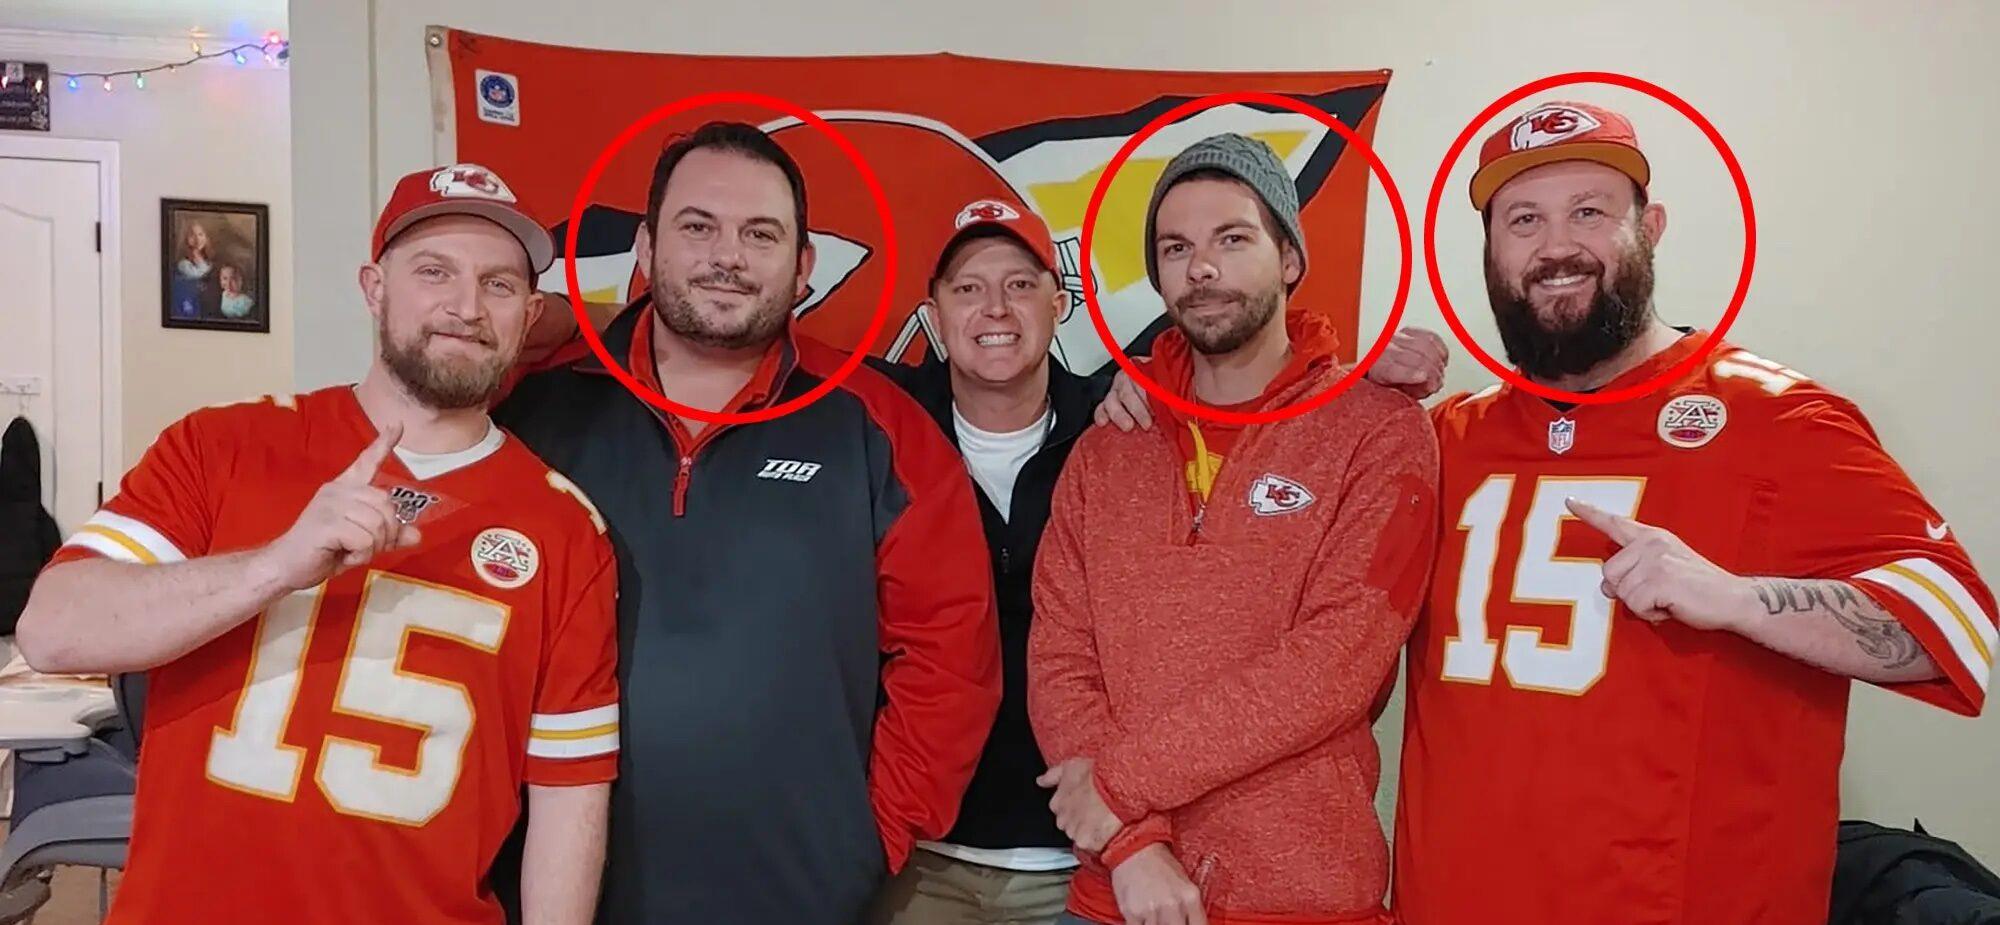 KC Chiefs Fans Mysterious Deaths: Cocaine & Fentanyl Reportedly Found In Systems